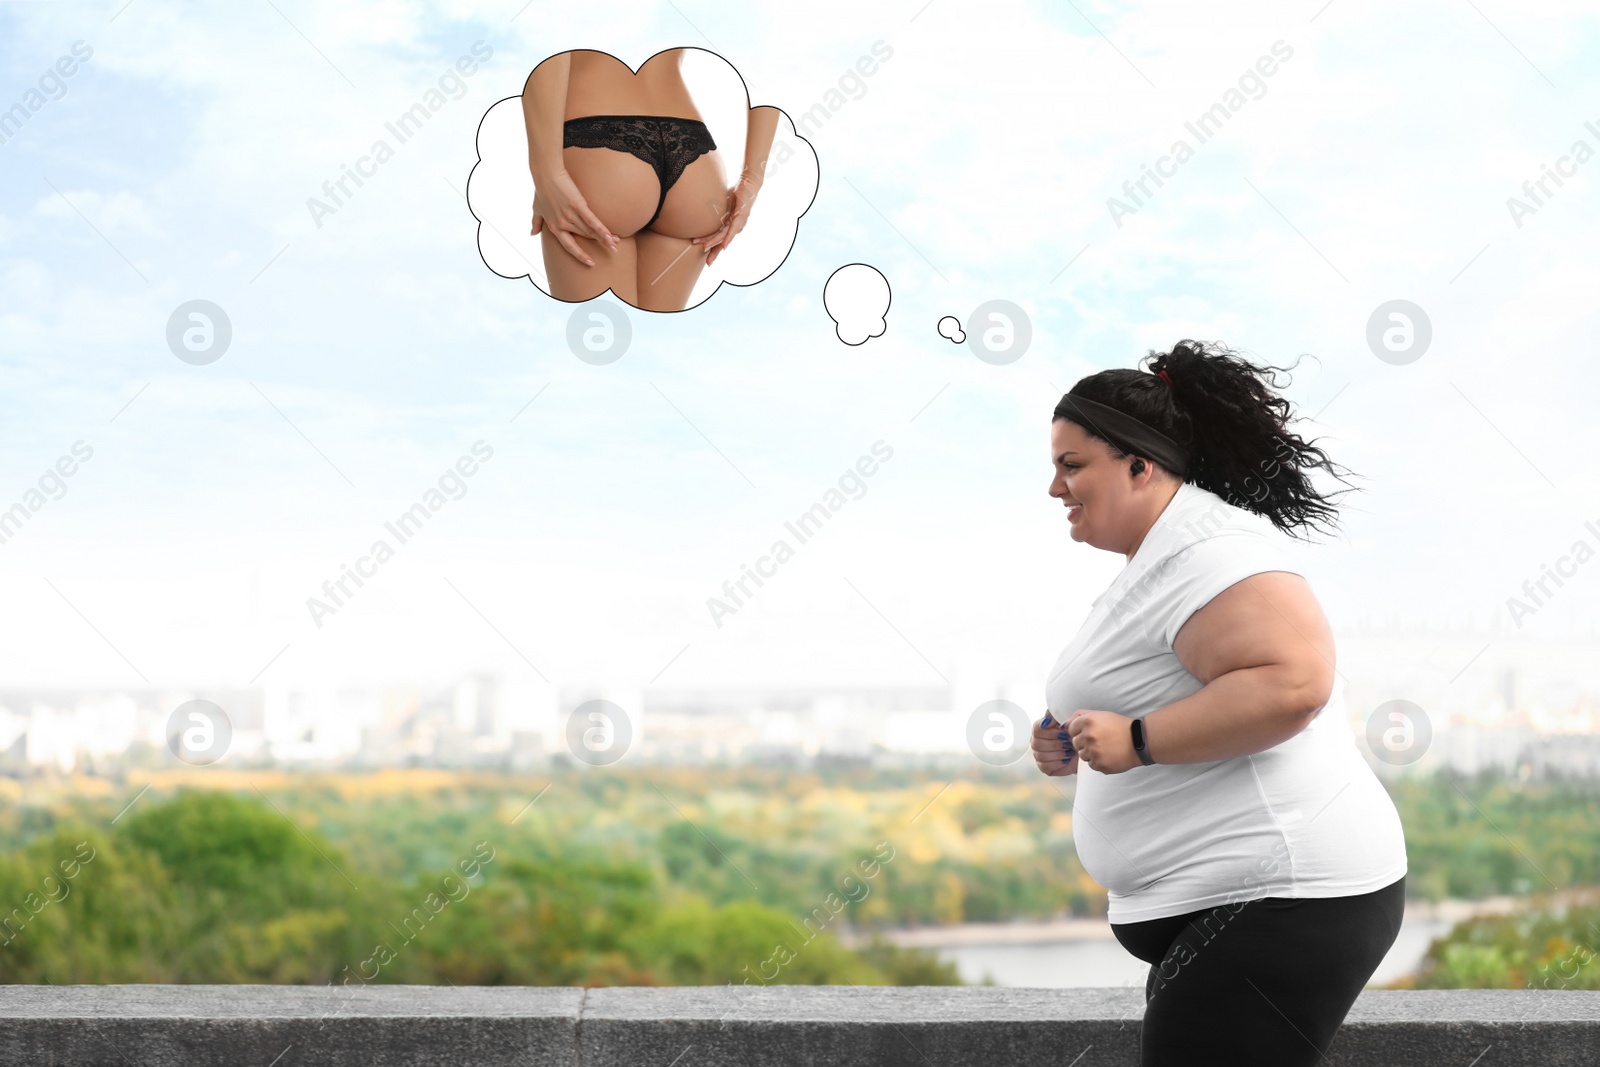 Image of Overweight woman dreaming about slim body while running outdoors